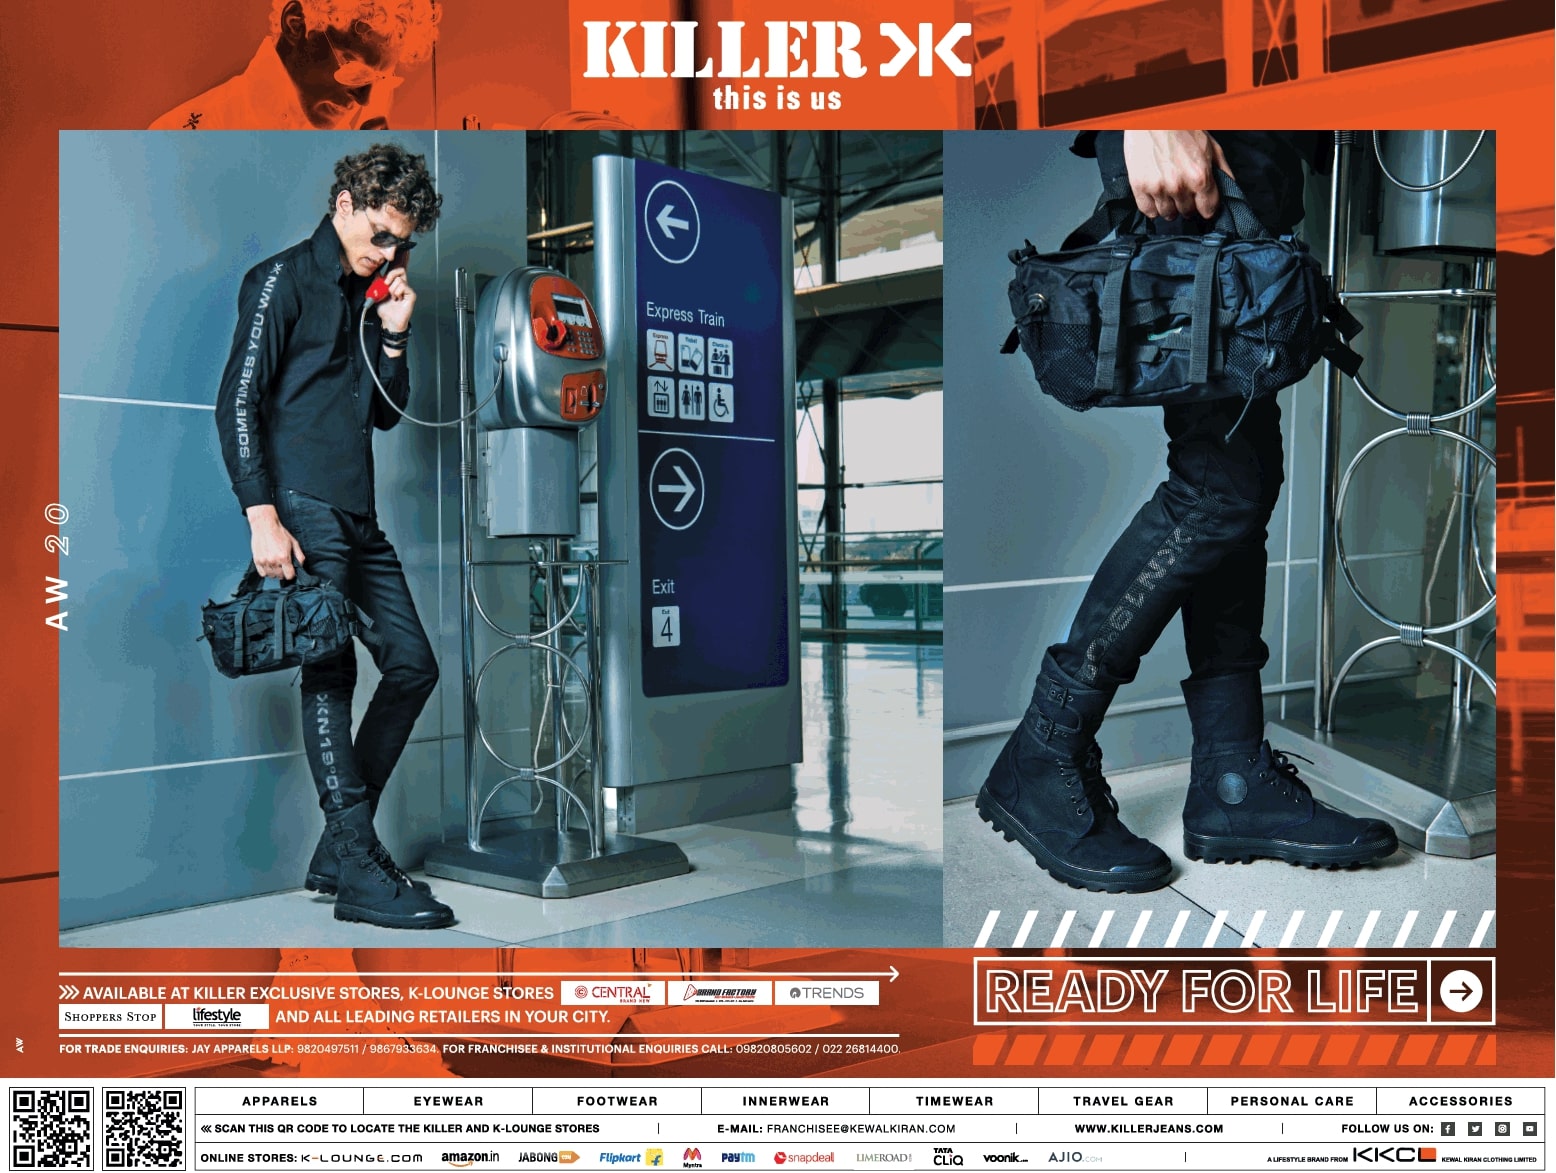 Killer-This-Is-Us-Ready-For-Life-Ad-Bombay-Times-30-12-2020